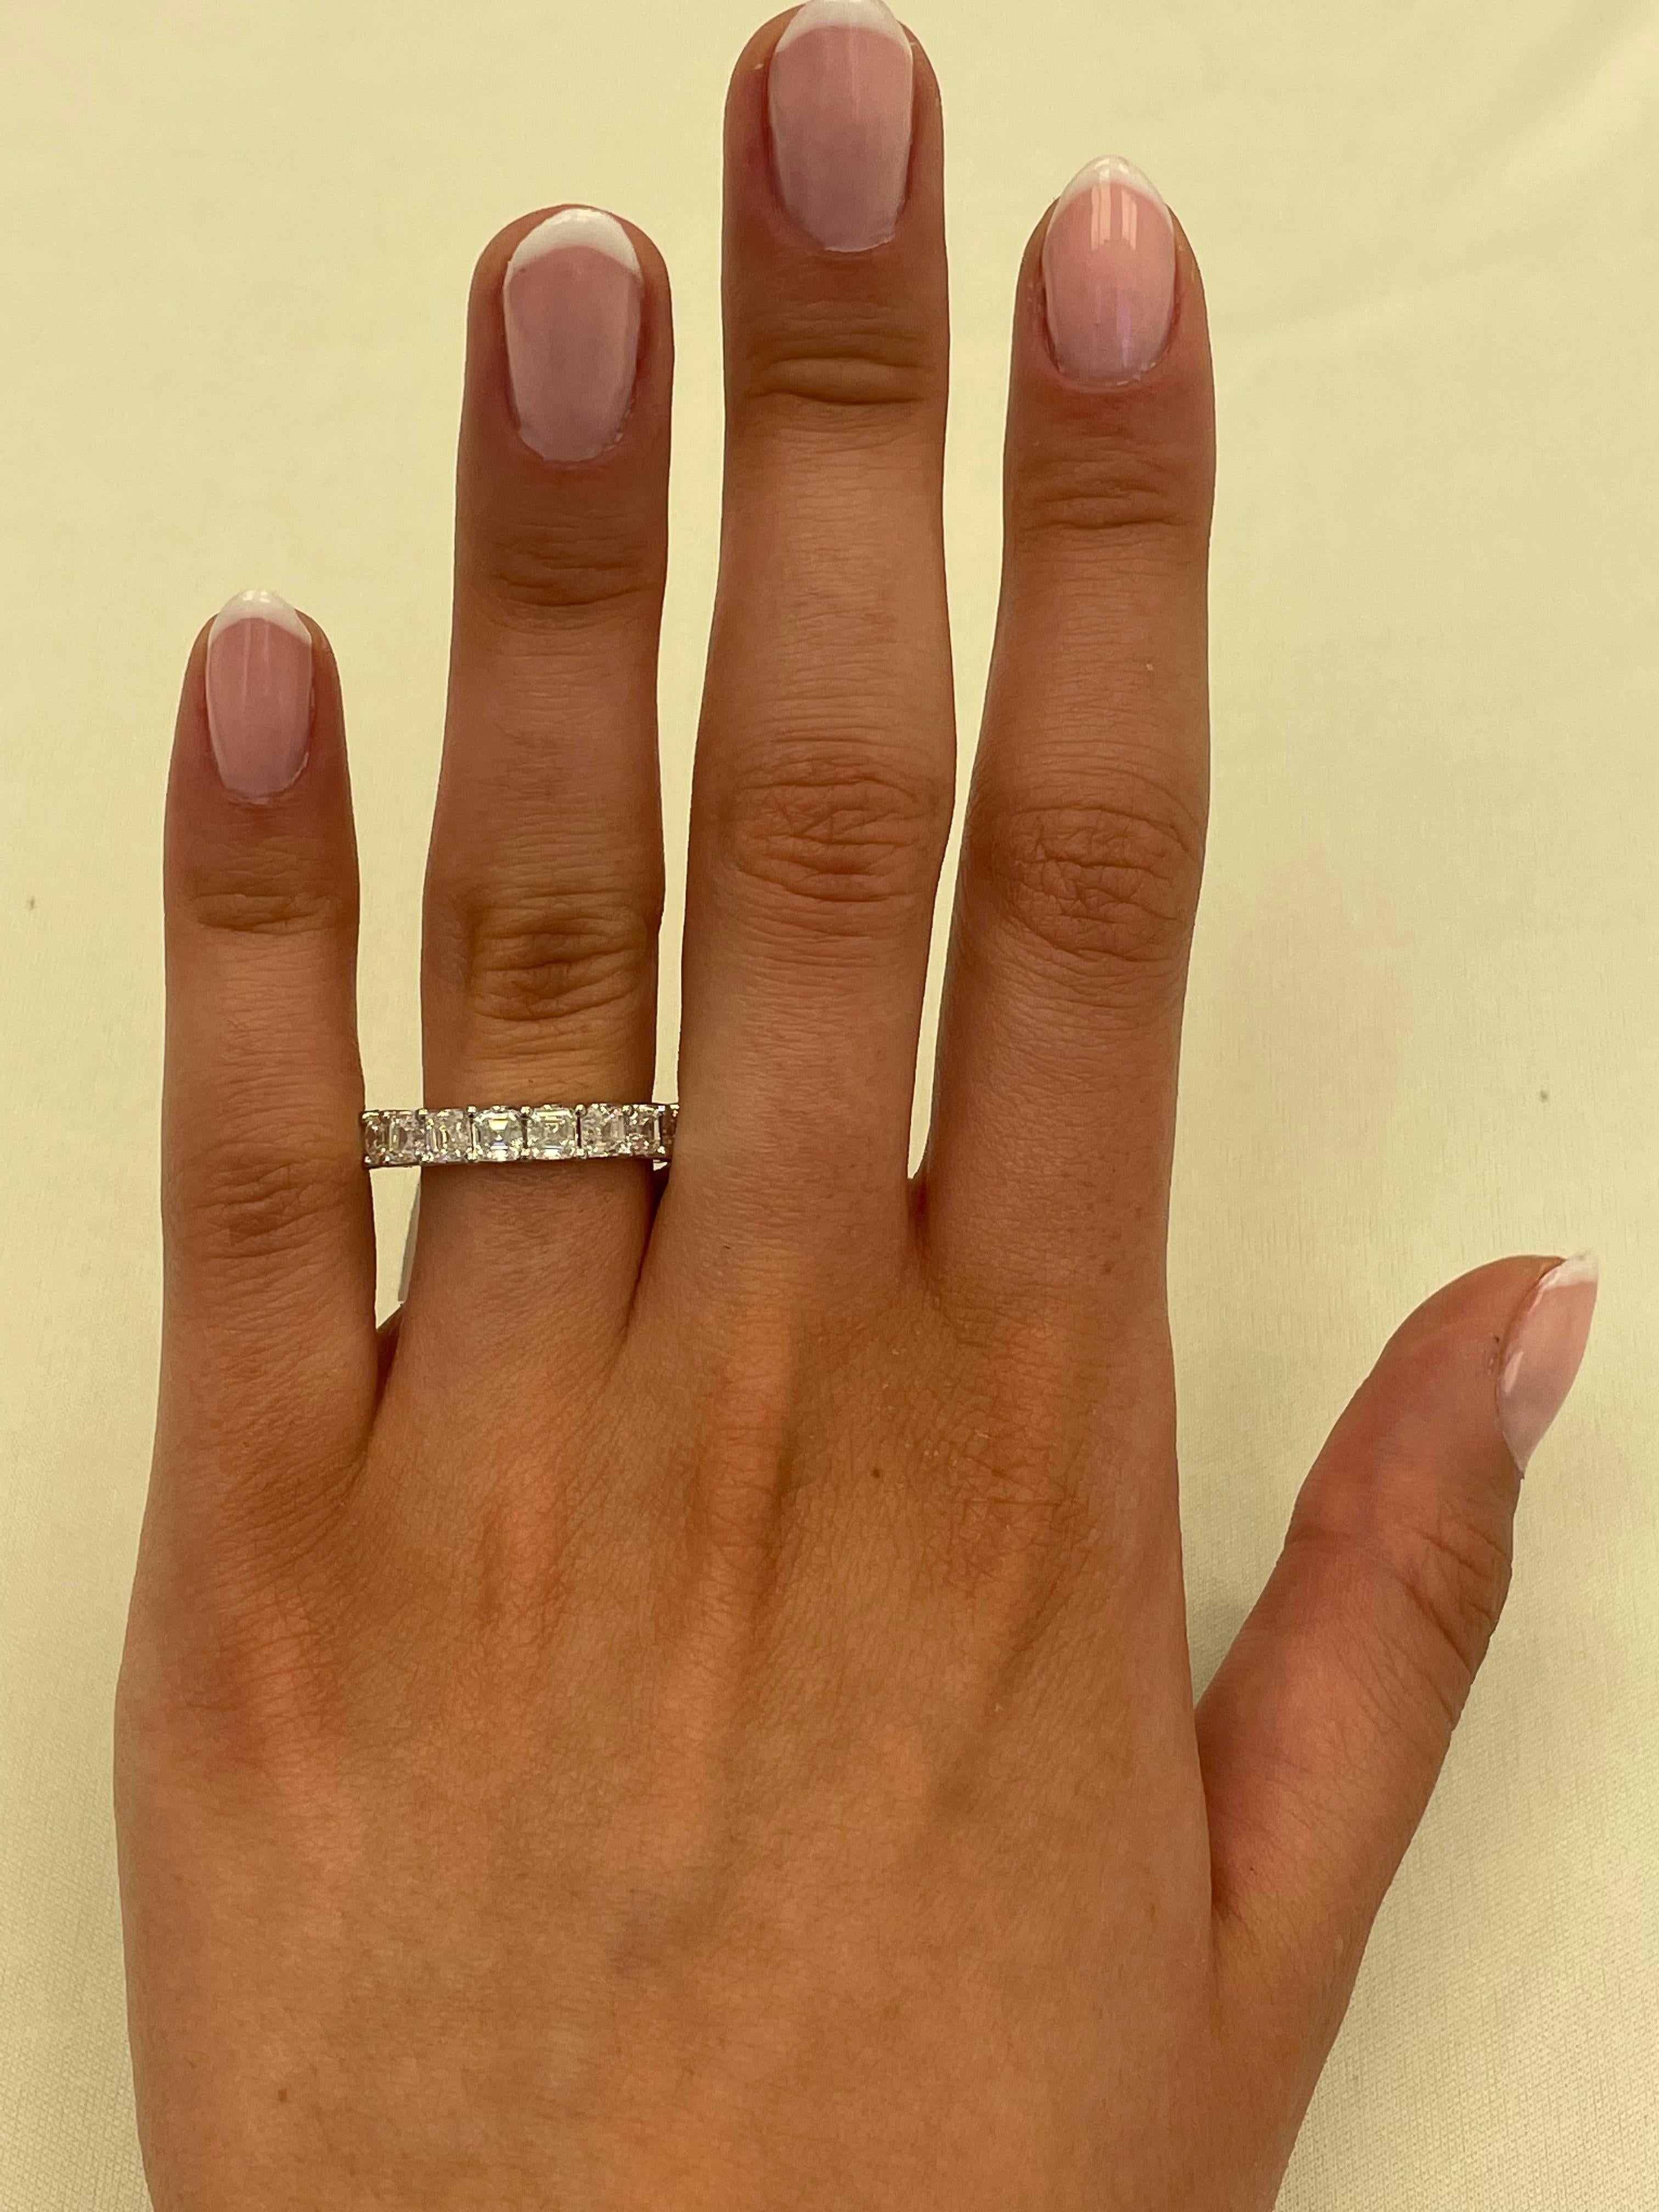 Stunning asscher cut diamond eternity band, By Alexander Beverly Hills.
20 asscher cut diamonds, 4.09 carats. D/E color and VVS clarity. 18-karat white gold, 4.09 grams, size 6.25. 
Accommodated with an up to date appraisal by a GIA G.G. upon